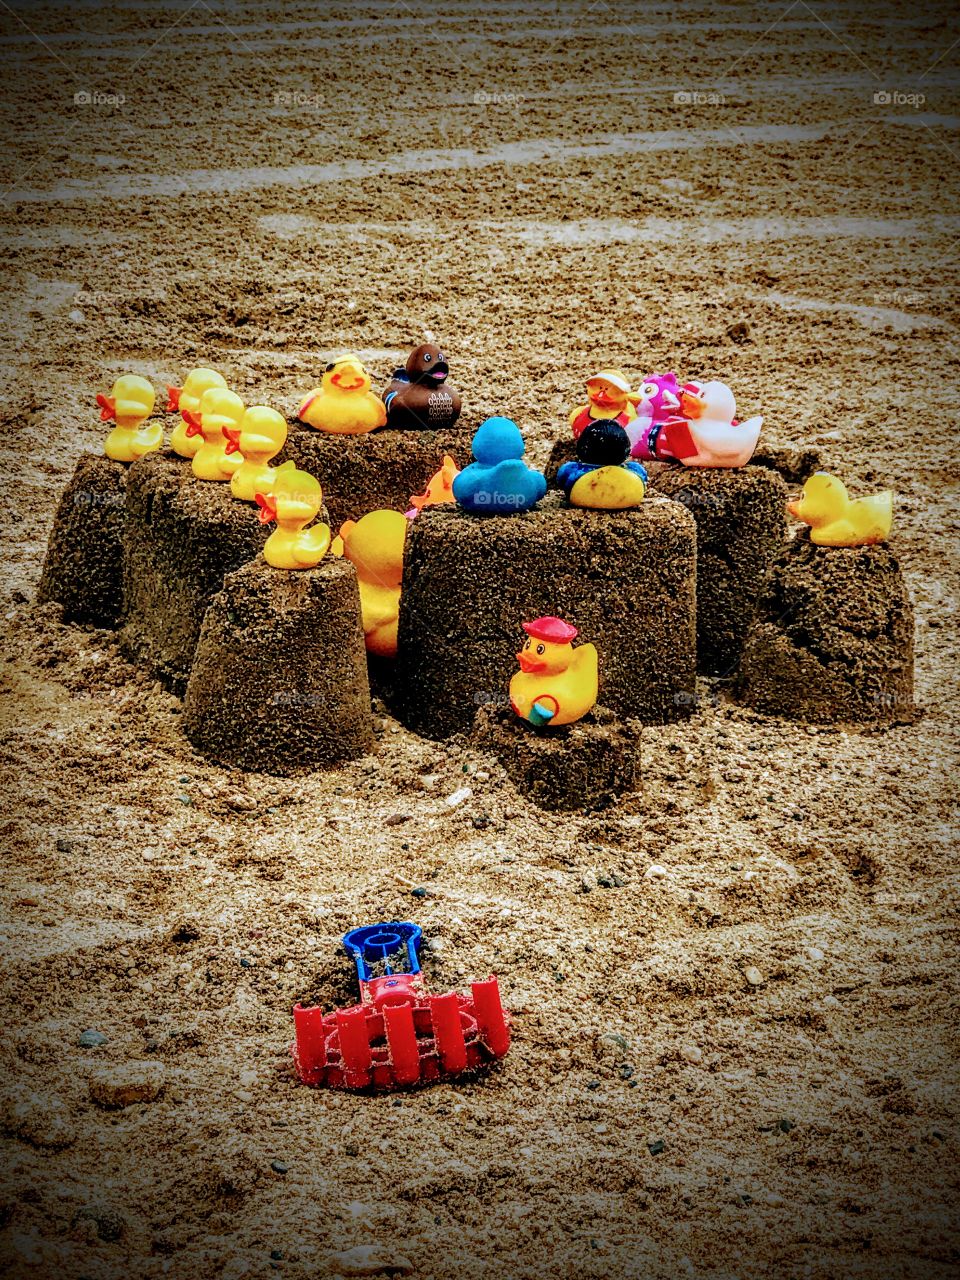 My daughter collects rubber ducks and she decided she had to bring half of the collection to the beach. So I did what any cool mom would do and I built a sand fortress for the ducks to rule dry land while we swam!